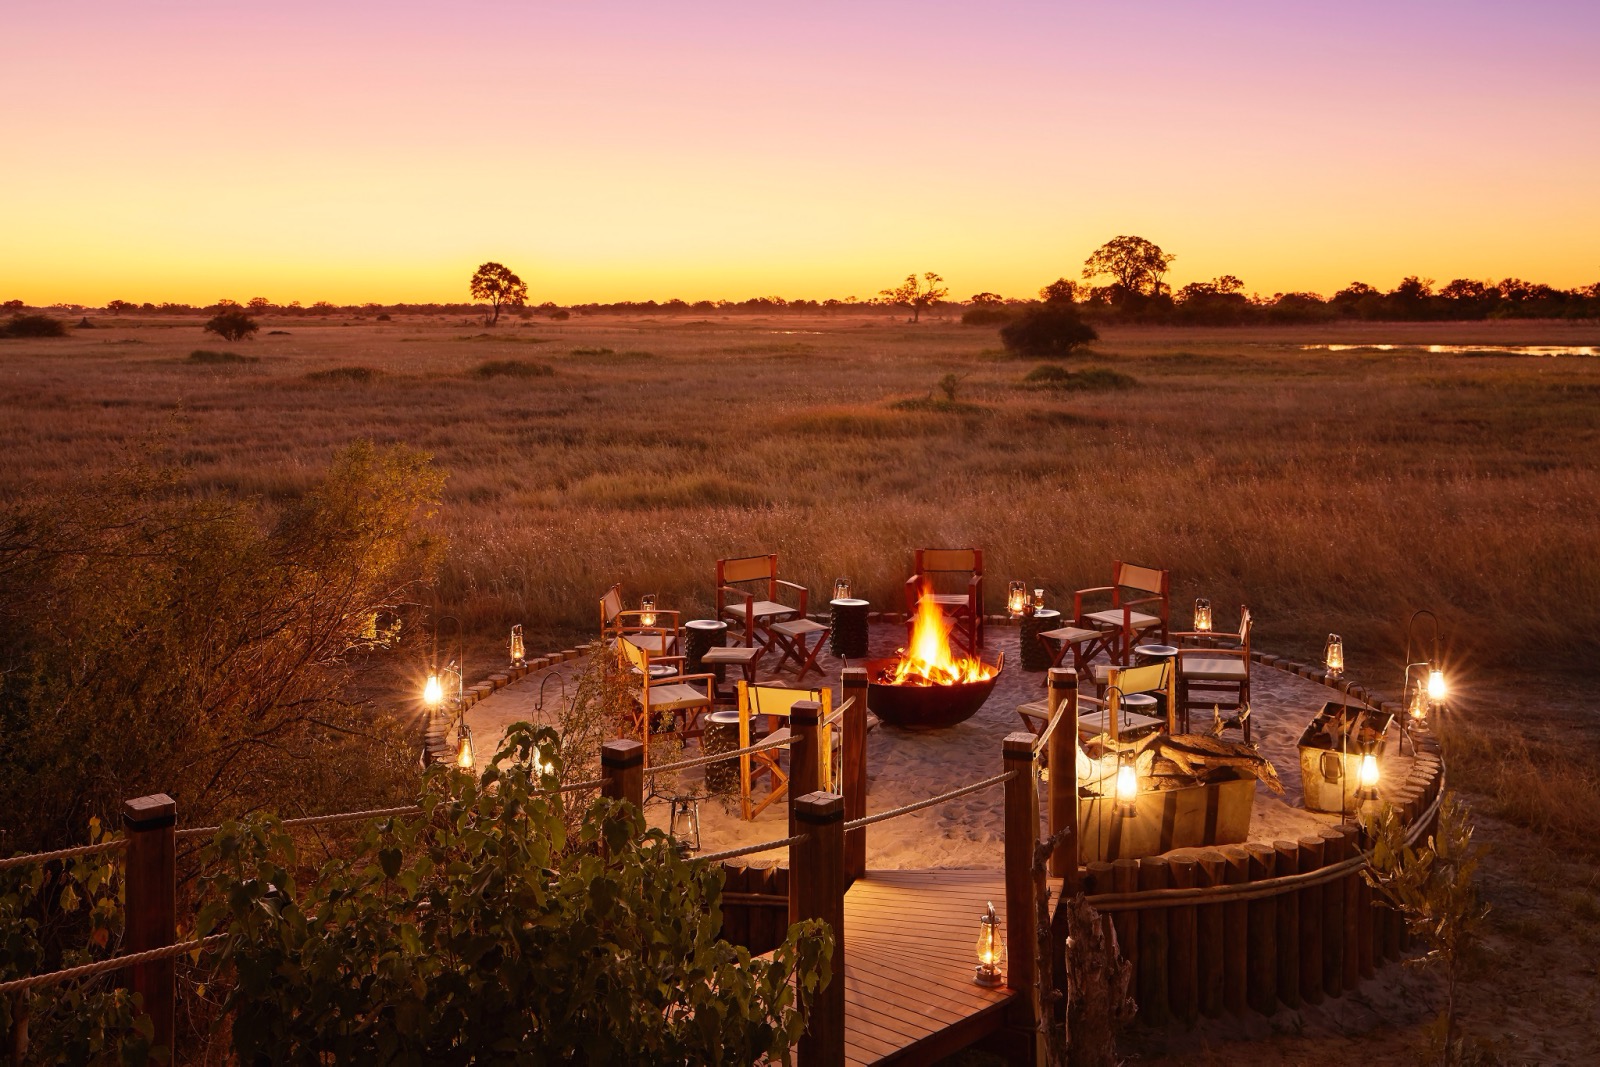 A fire burns brightly in the centre of an outdoor dining area overlooking the Botswana savanna and sunset